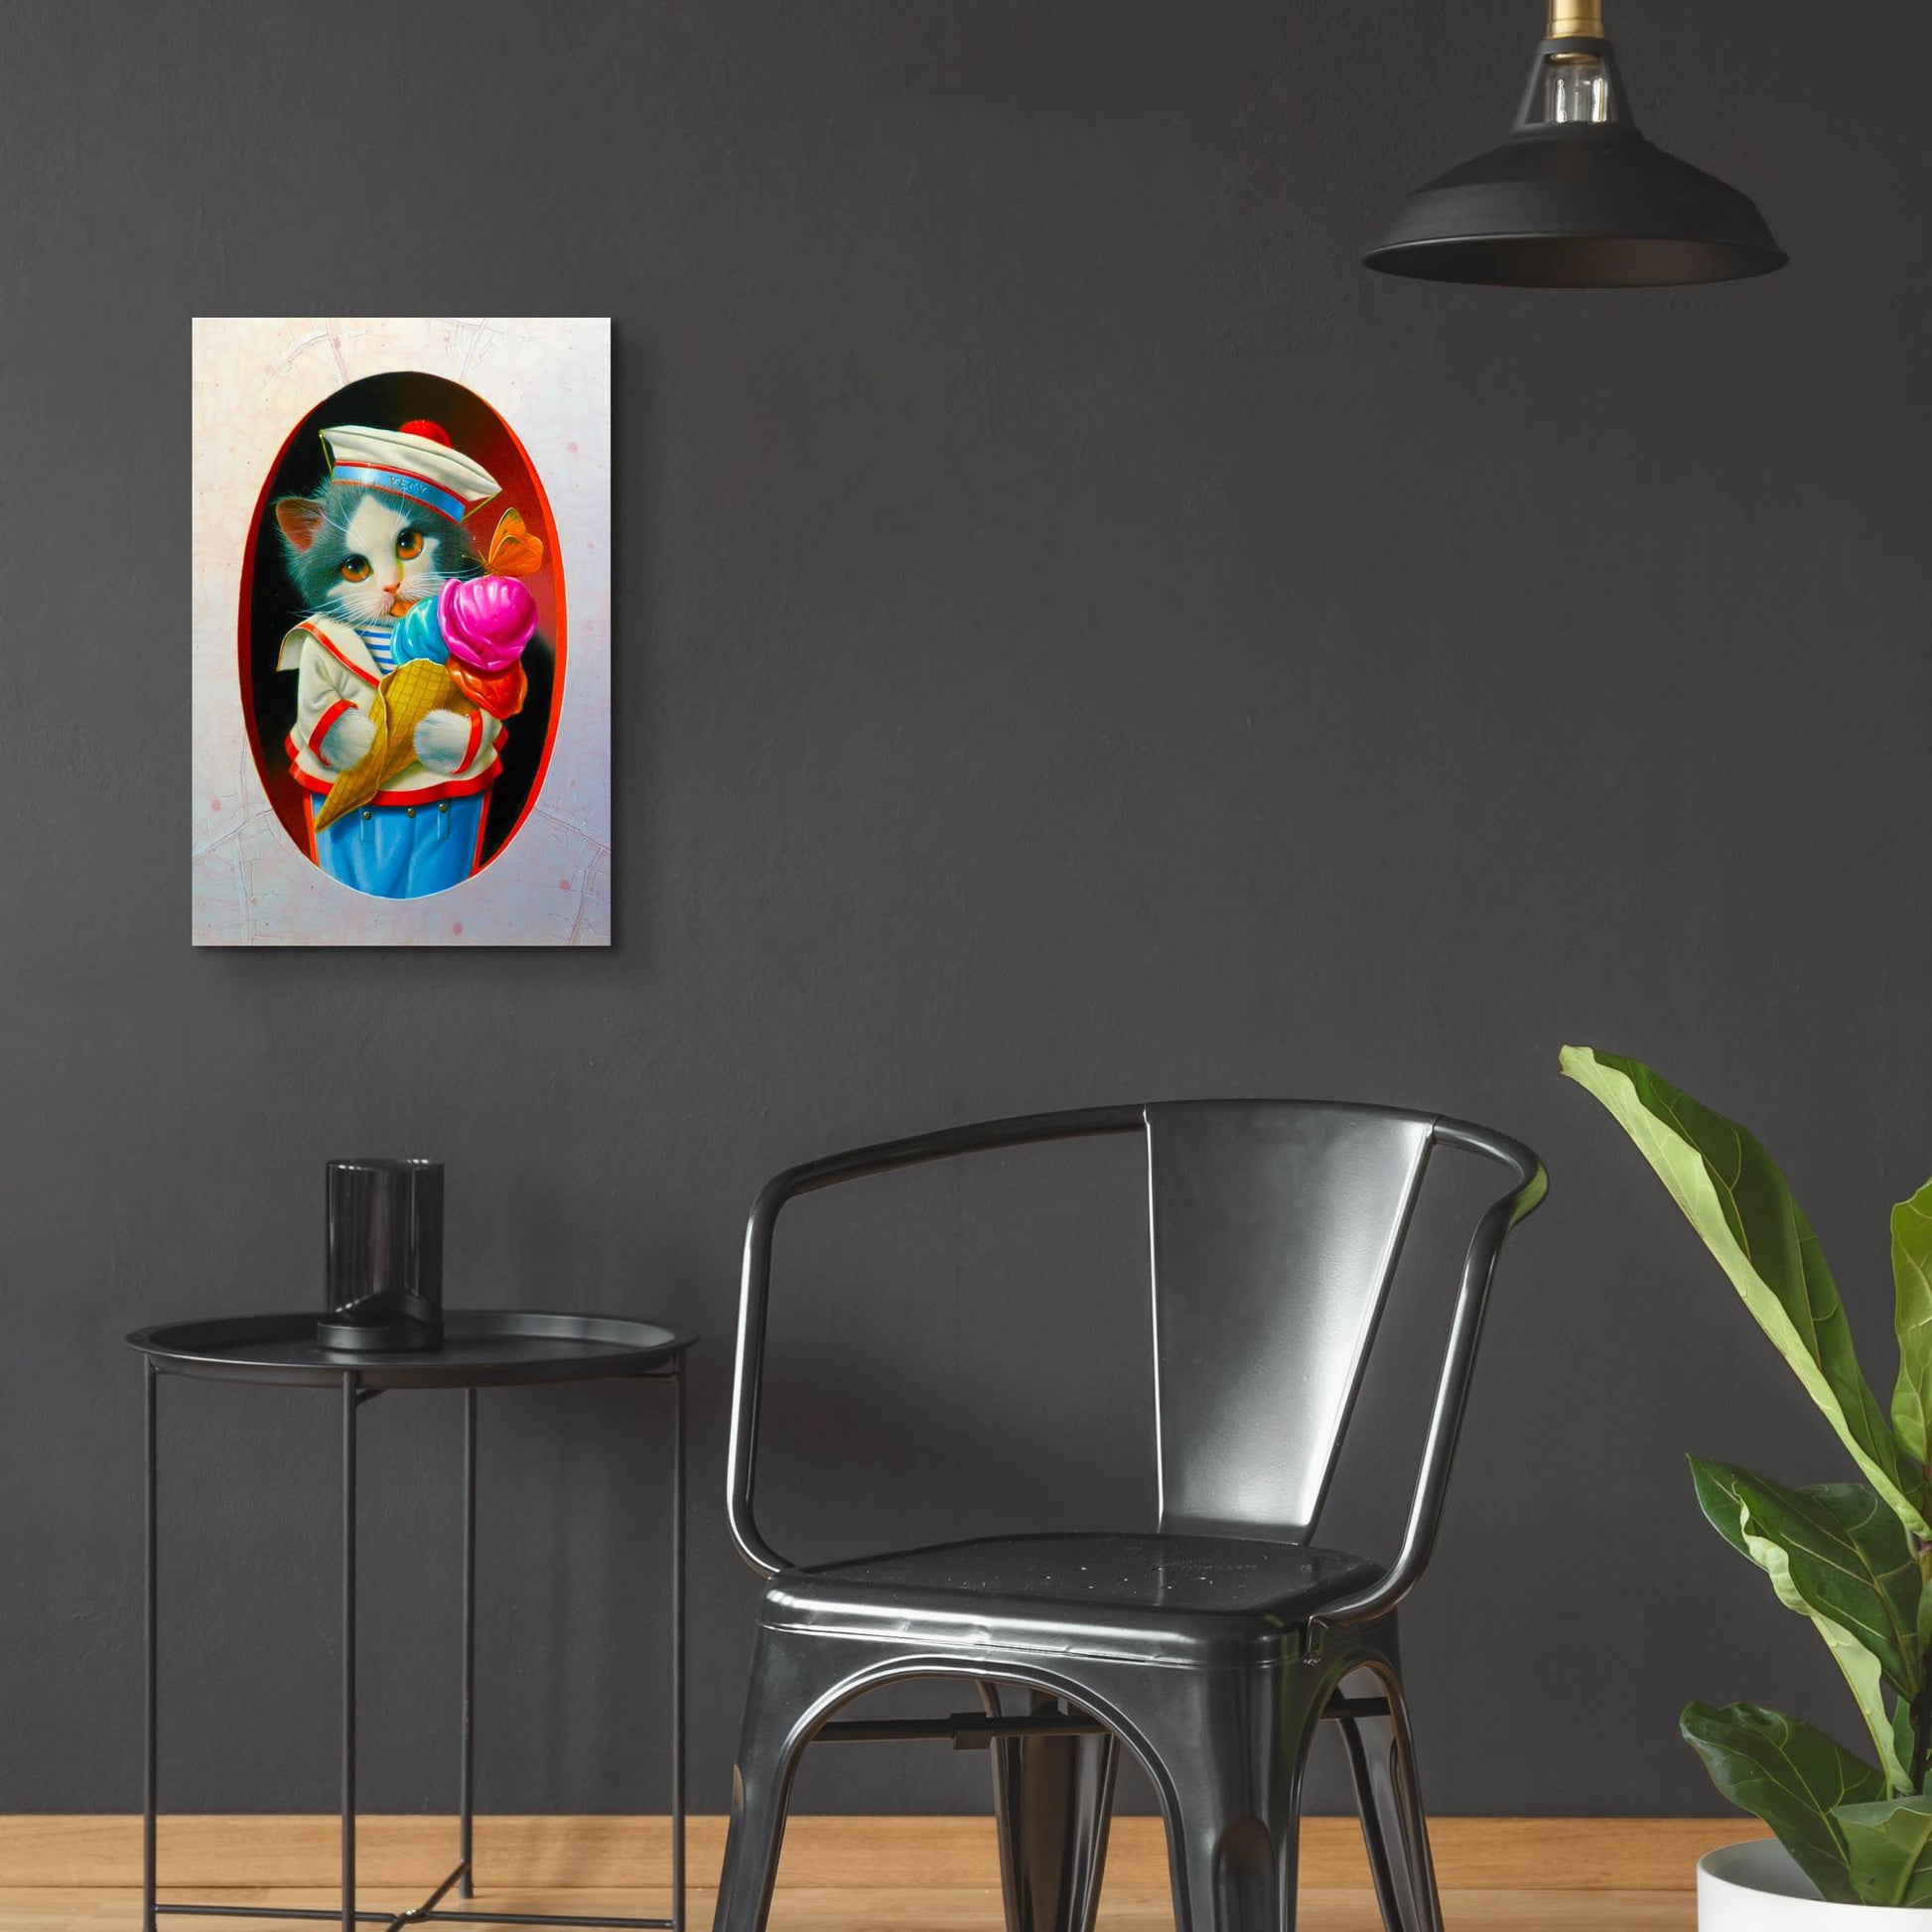 Epic Art 'The Ice Cream Cone' by Valery Vecu Quitard, Acrylic Glass Wall Art,16x24